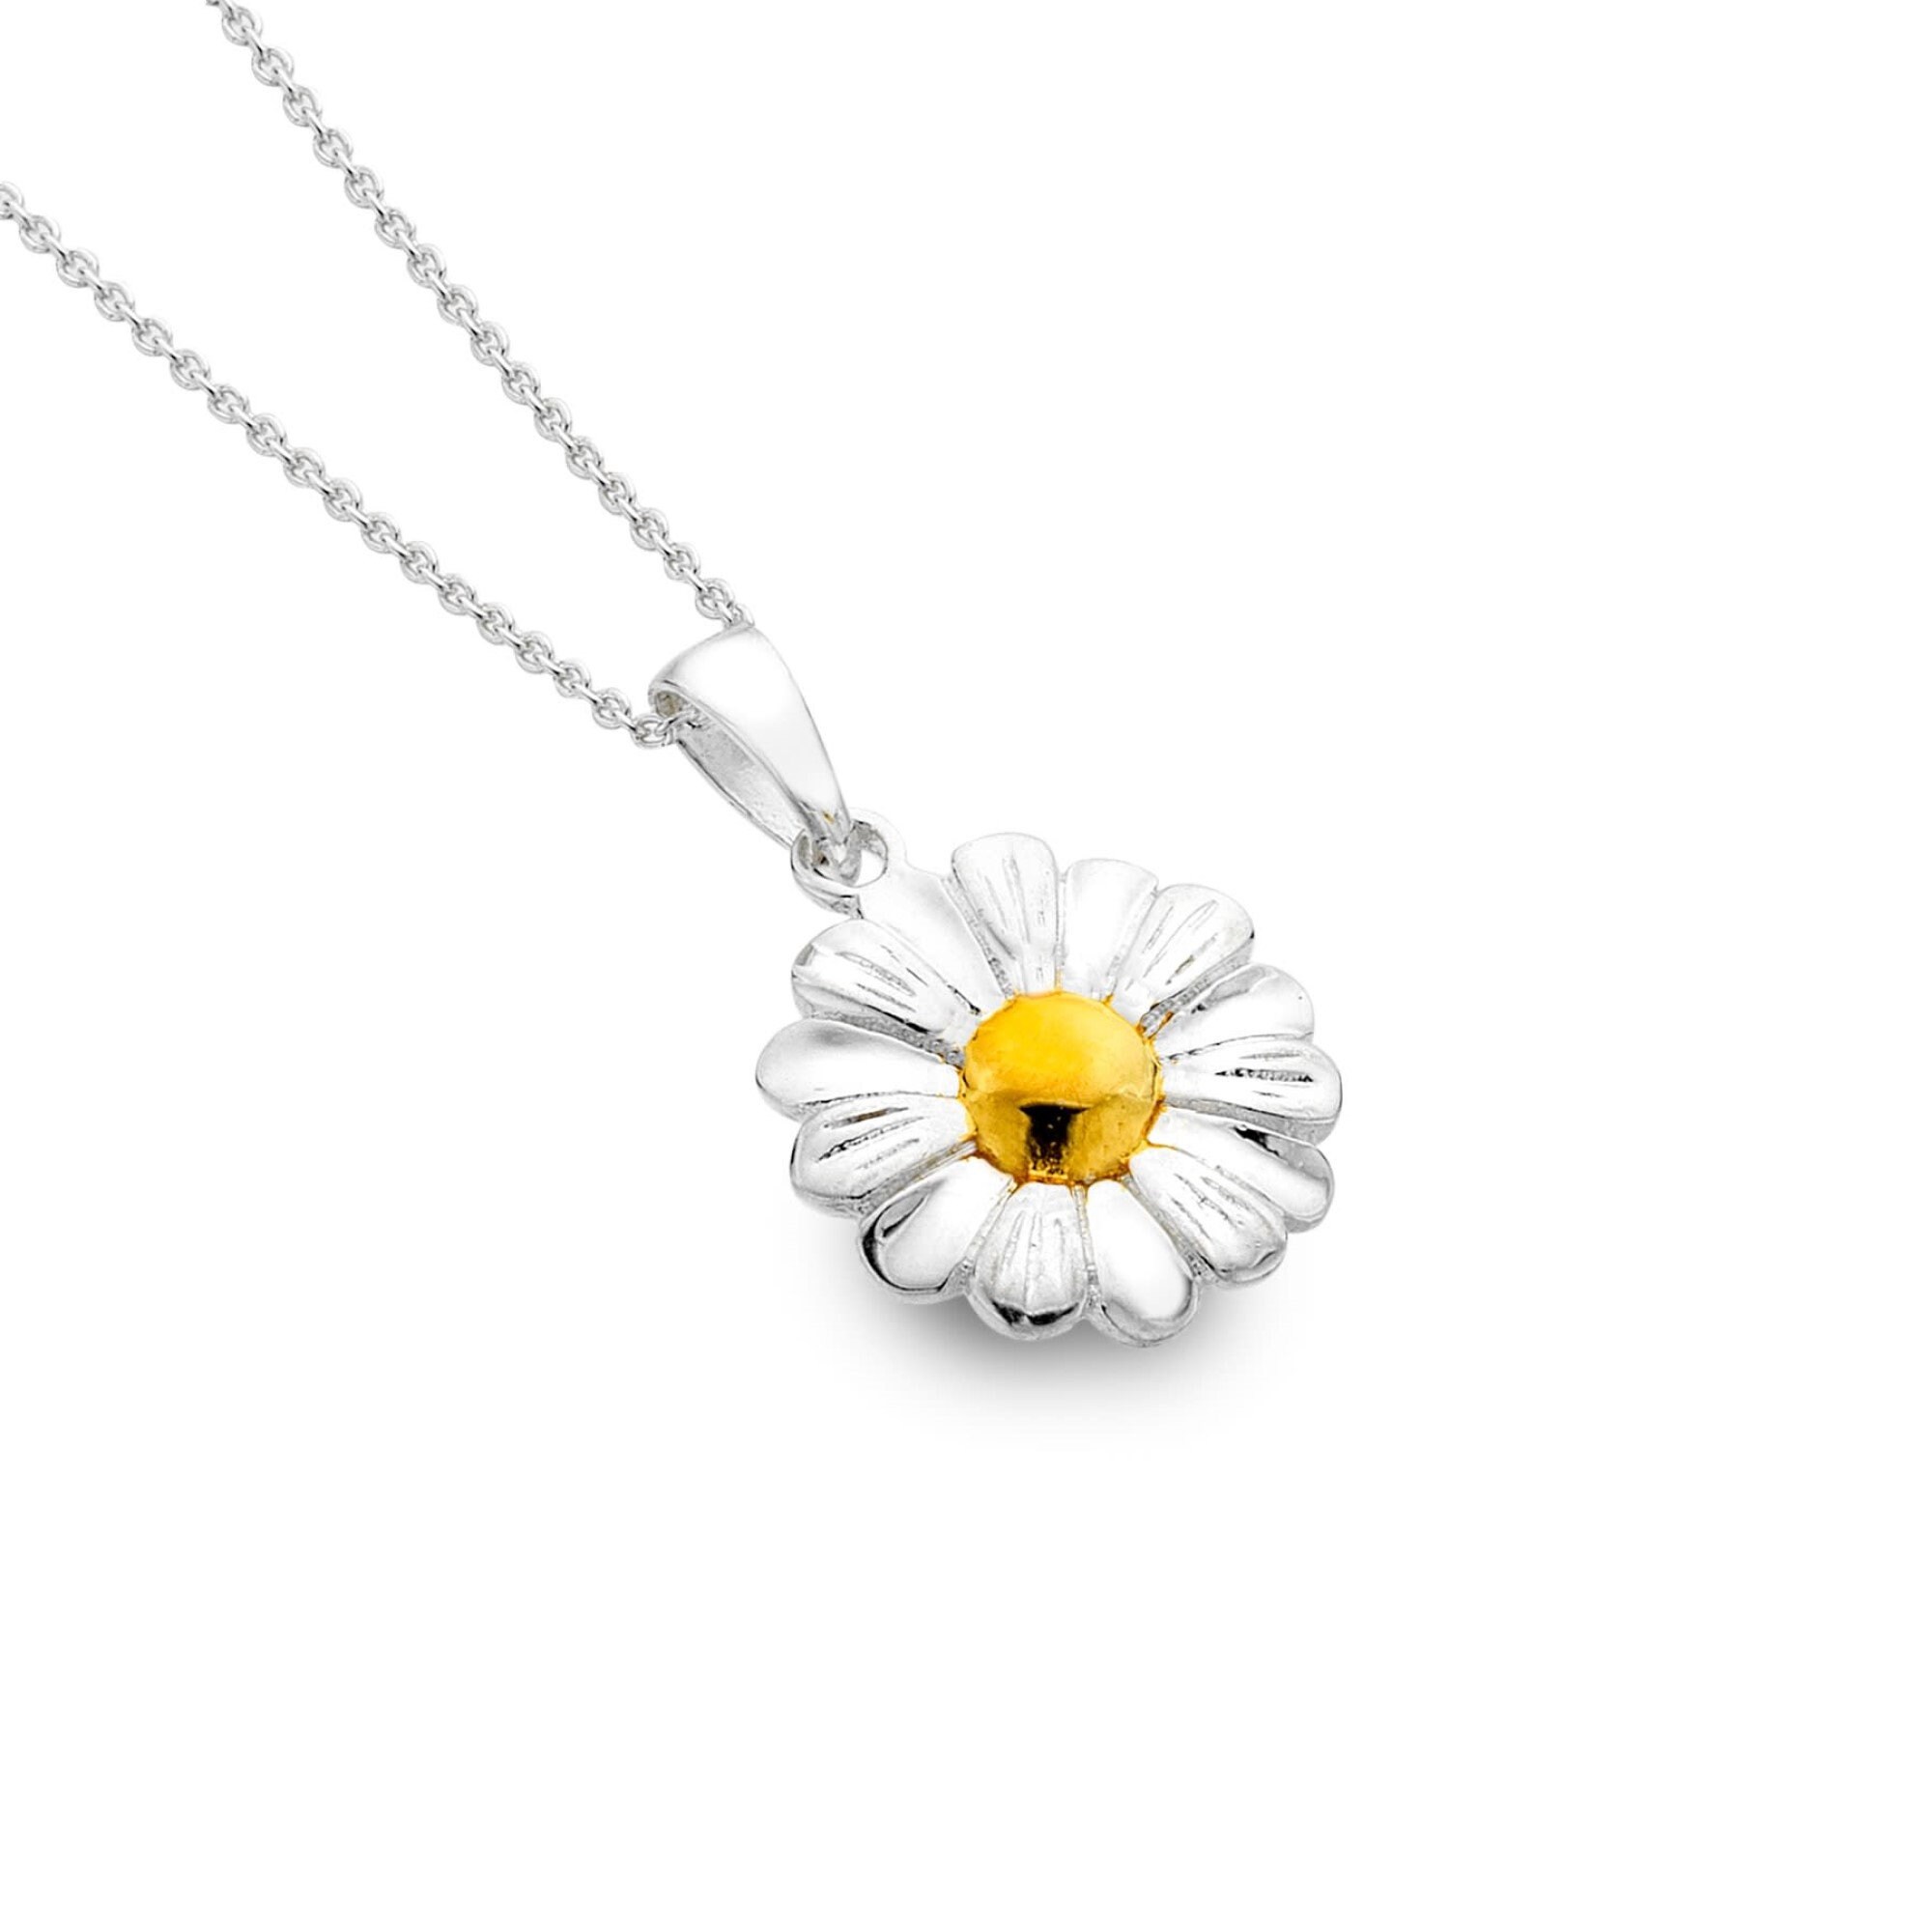 Daisy Chain Pendant Jewellery and Gifts Sea Gems Jewellery Silver Origins Sterling Silver 925 Gift Box Included